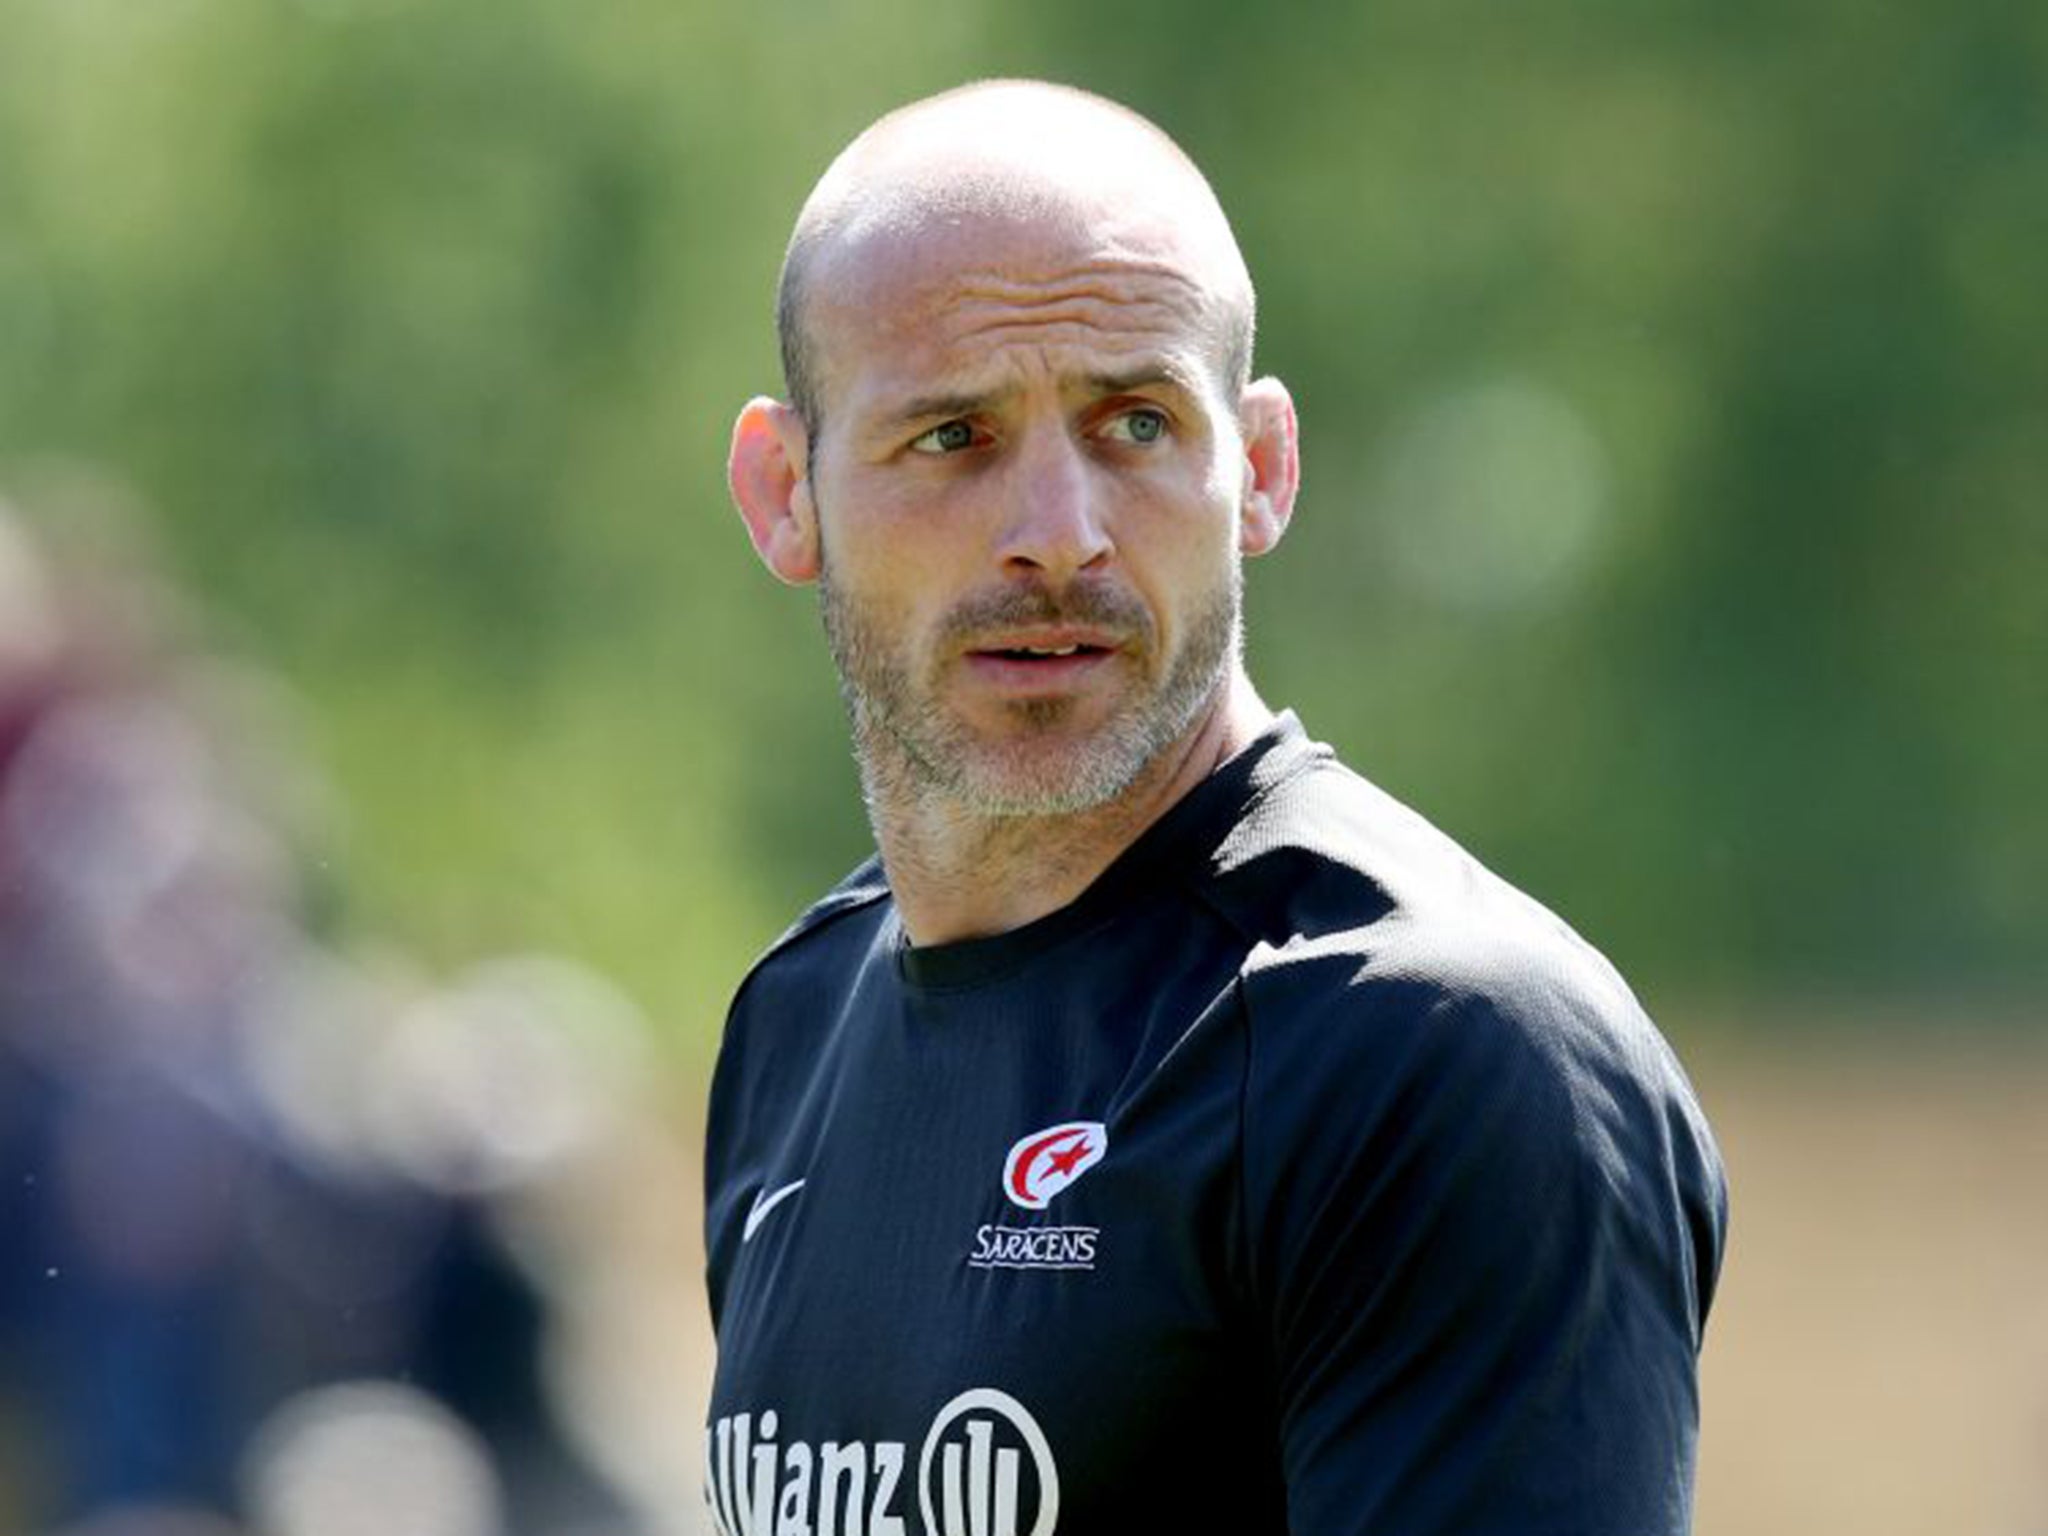 Paul Gustard has been offered a move from Saracens to an assistant coaching role with England